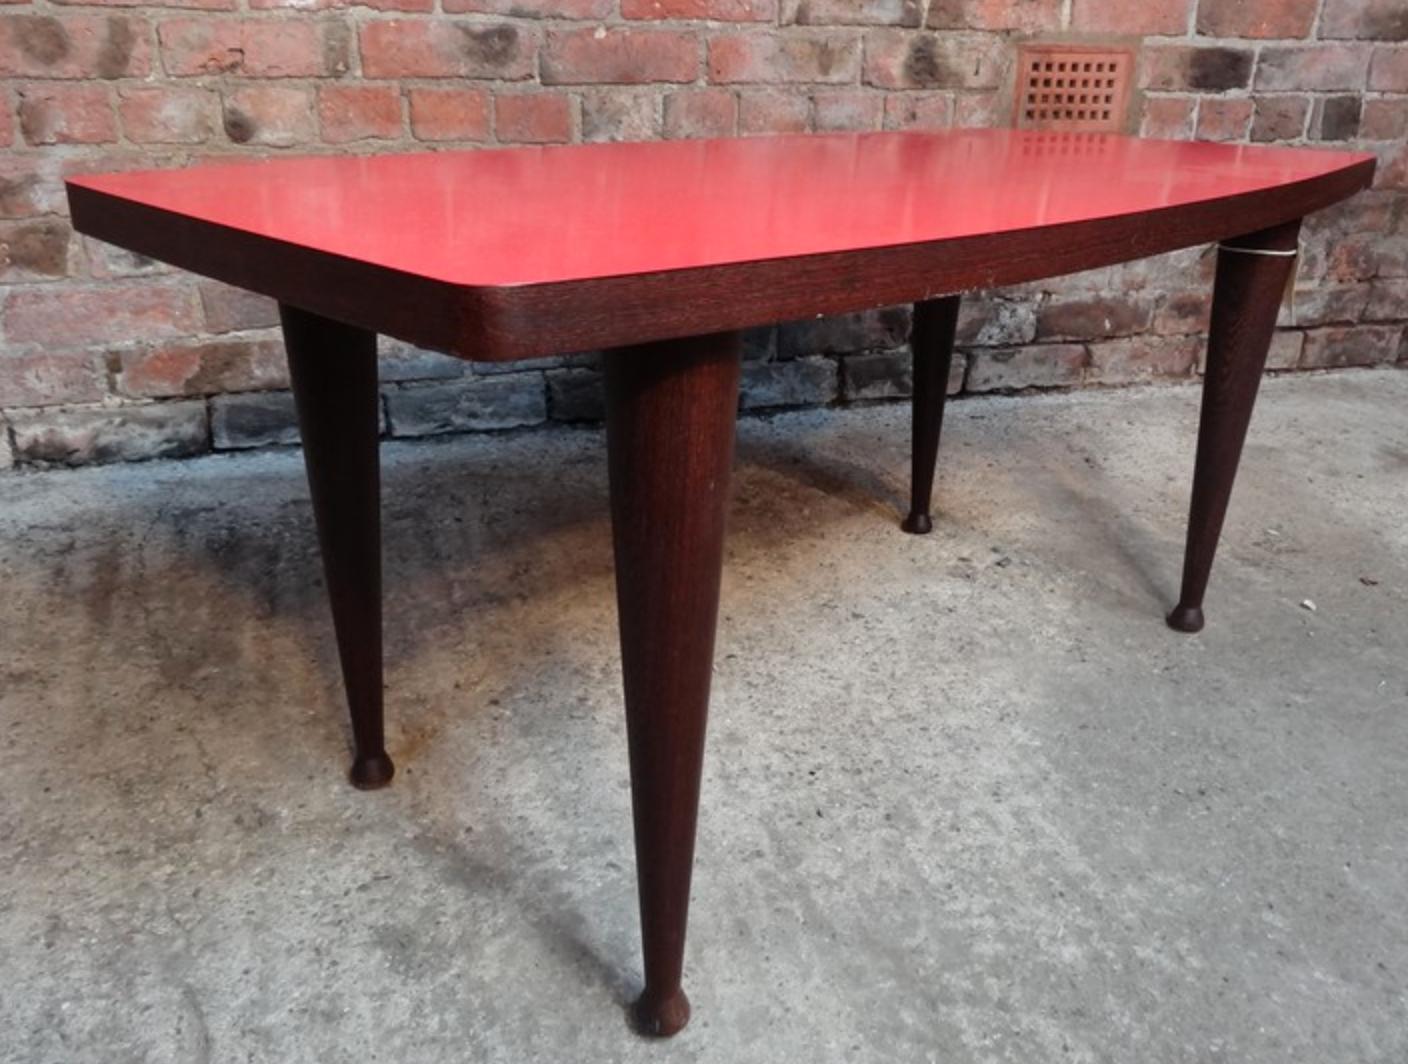 Fantastic coffee table in mint condition, the table stands on a lovely solid wooden legs. 

Measures: Height 50cm, depth 56cm, width 112cm.